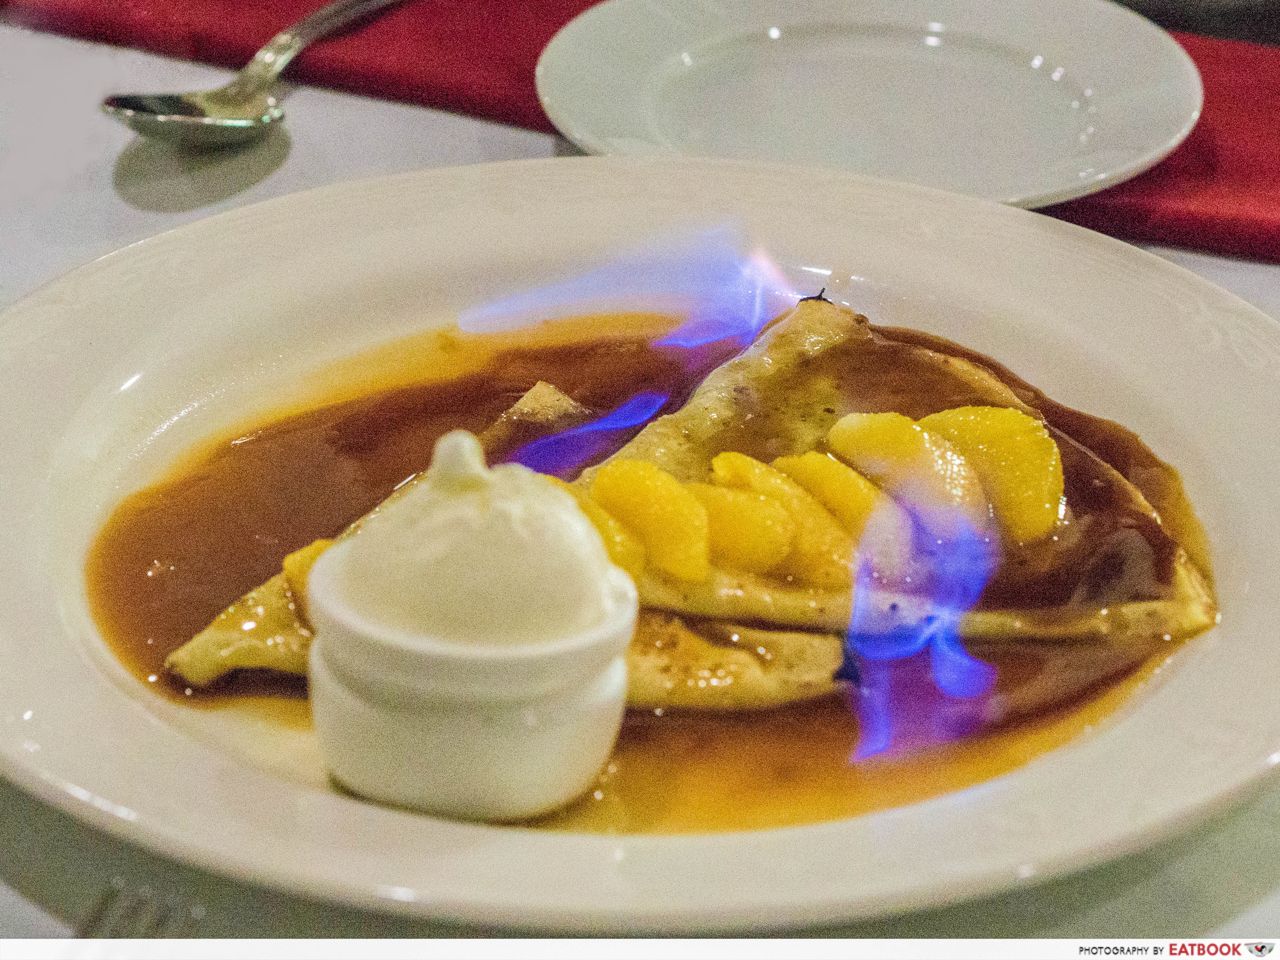 swan valley - crepes suzette